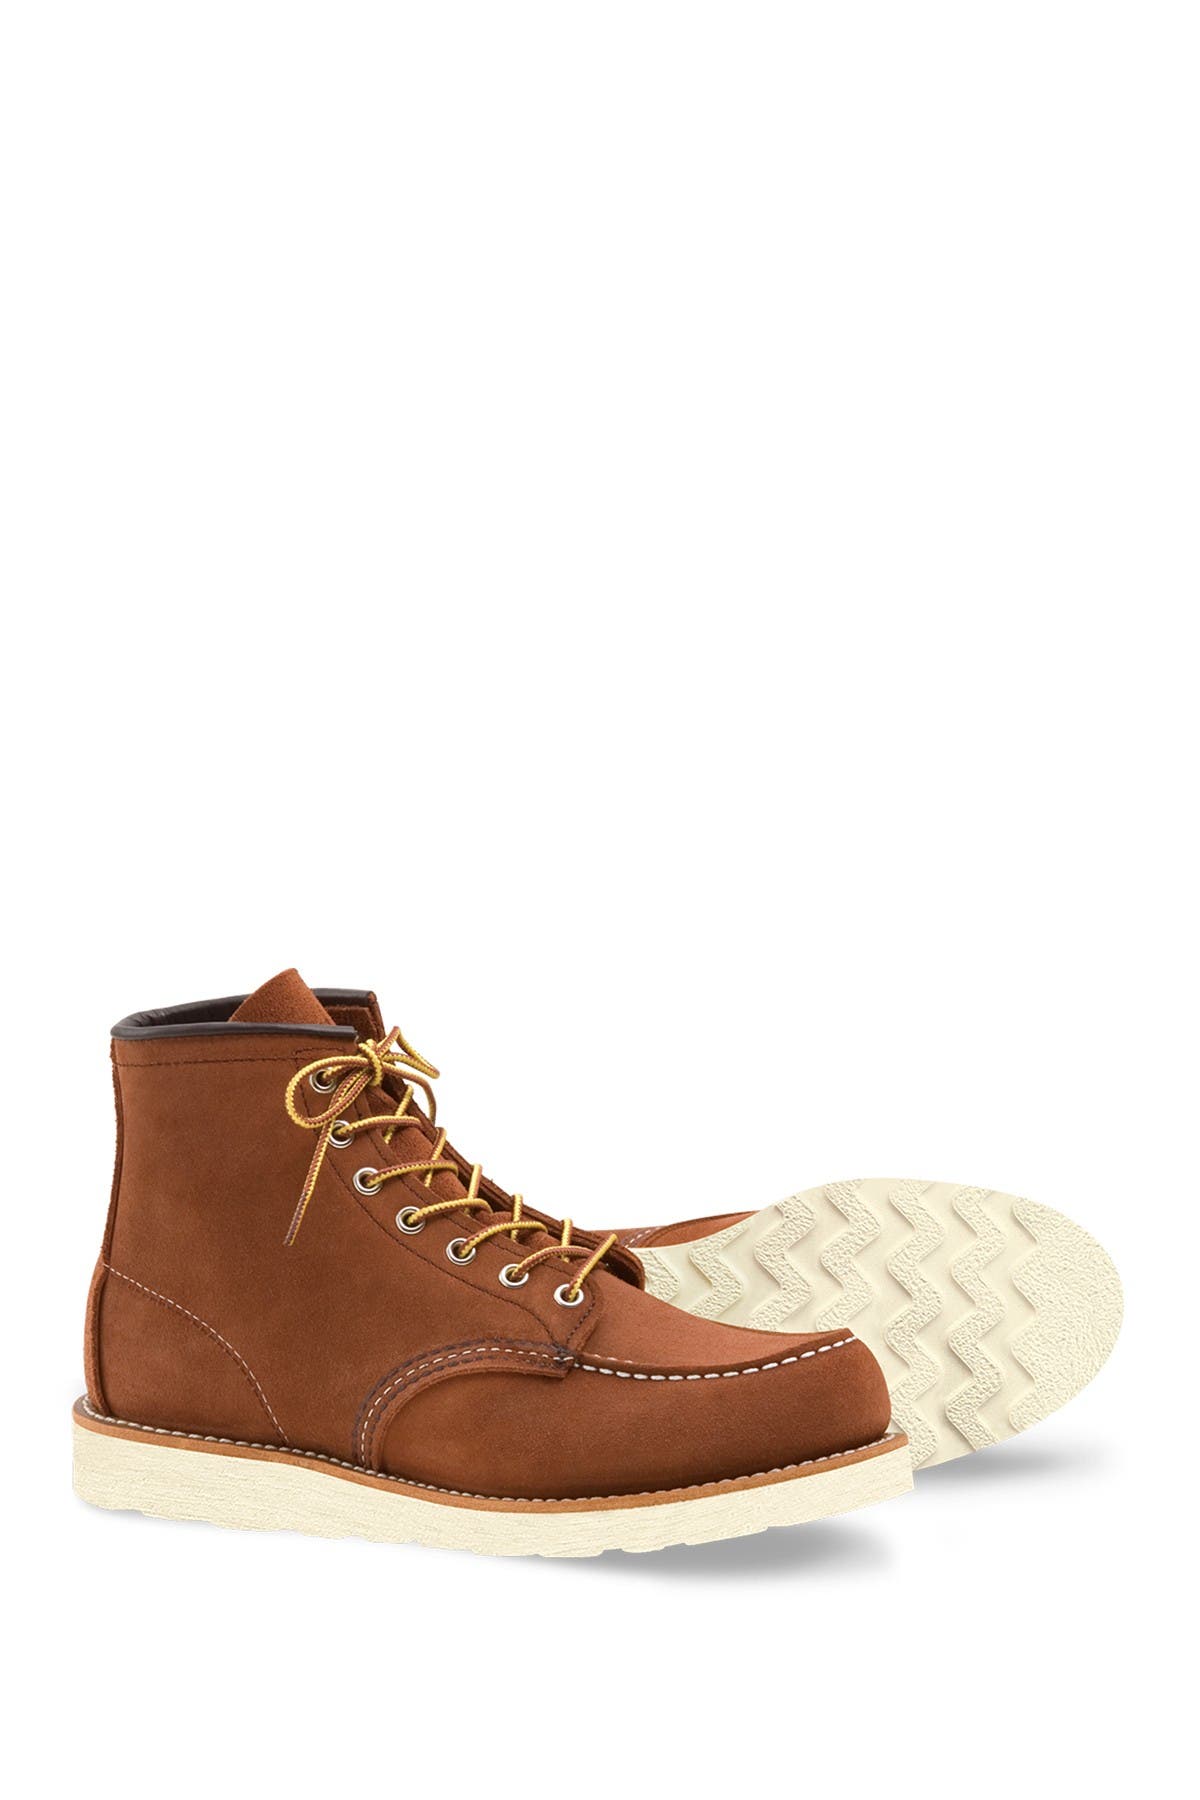 red wing wide width